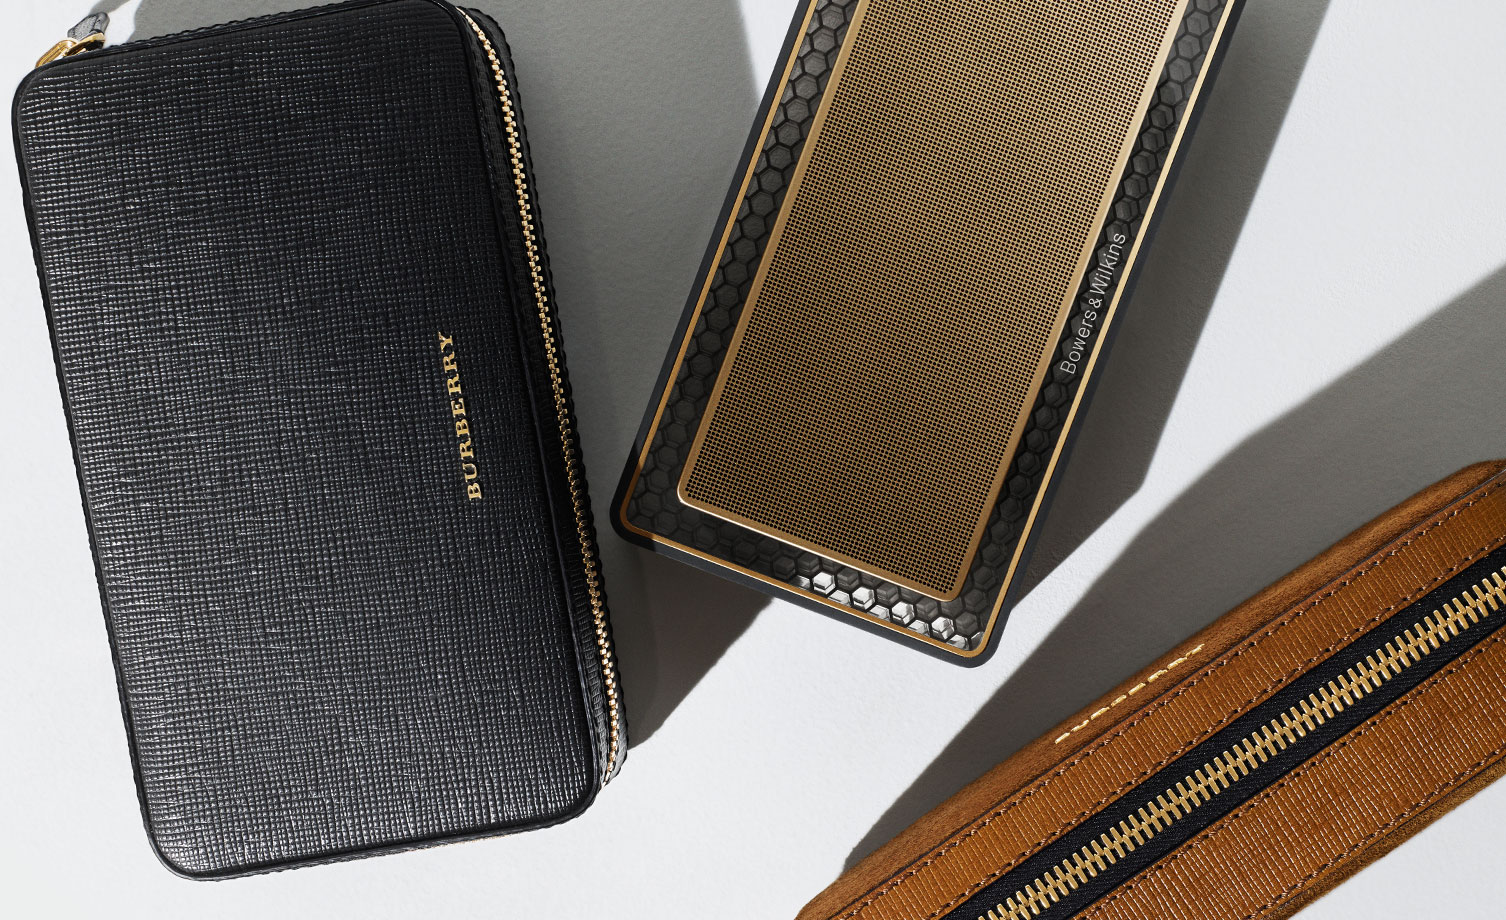 Bowers & Wilkins release a Burberry bluetooth speaker, because why not?